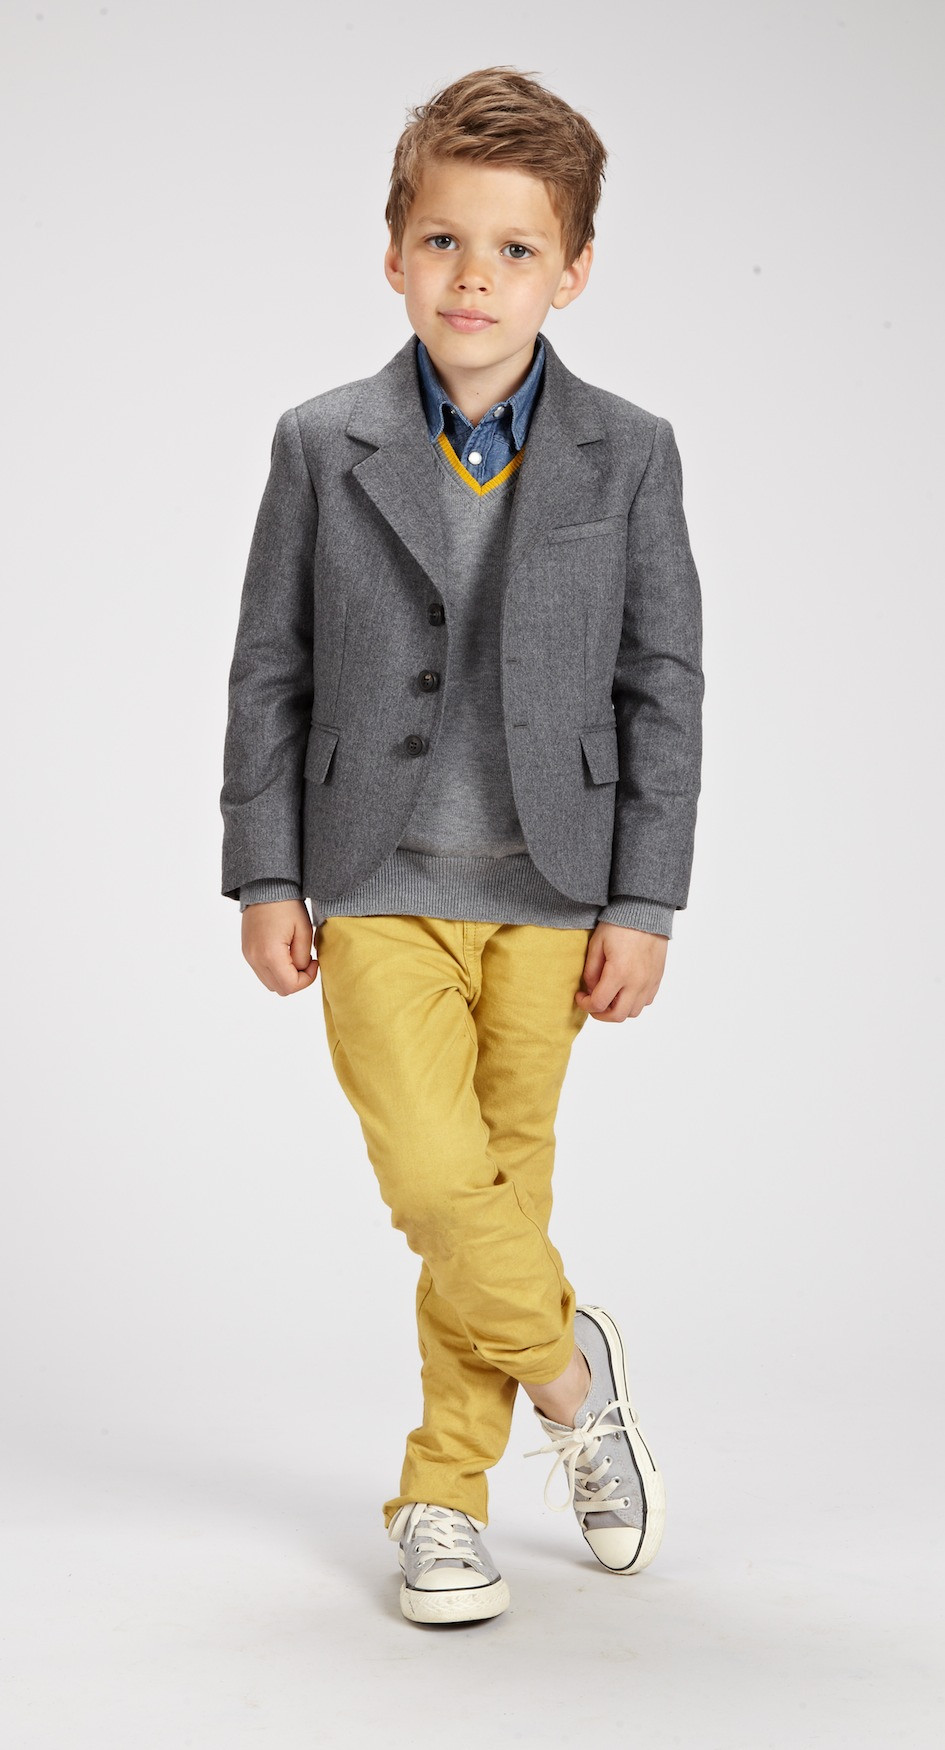 Fashion For Kids Boy
 My choices for Marie Chantal winter 2013 kids designer